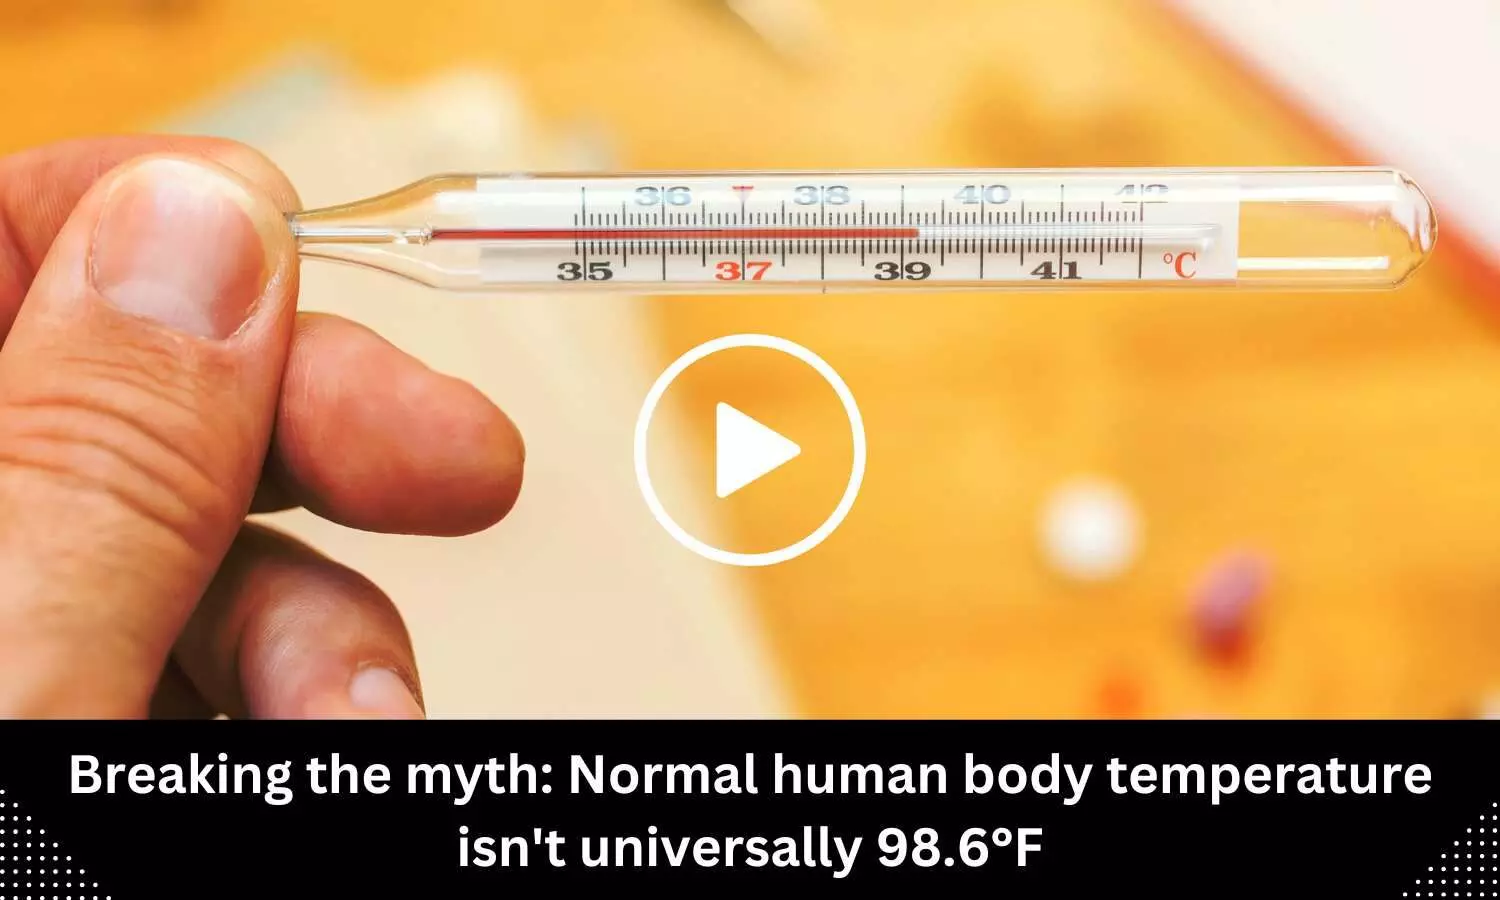 Breaking the myth: Normal human body temperature isnt universally 98.6°F